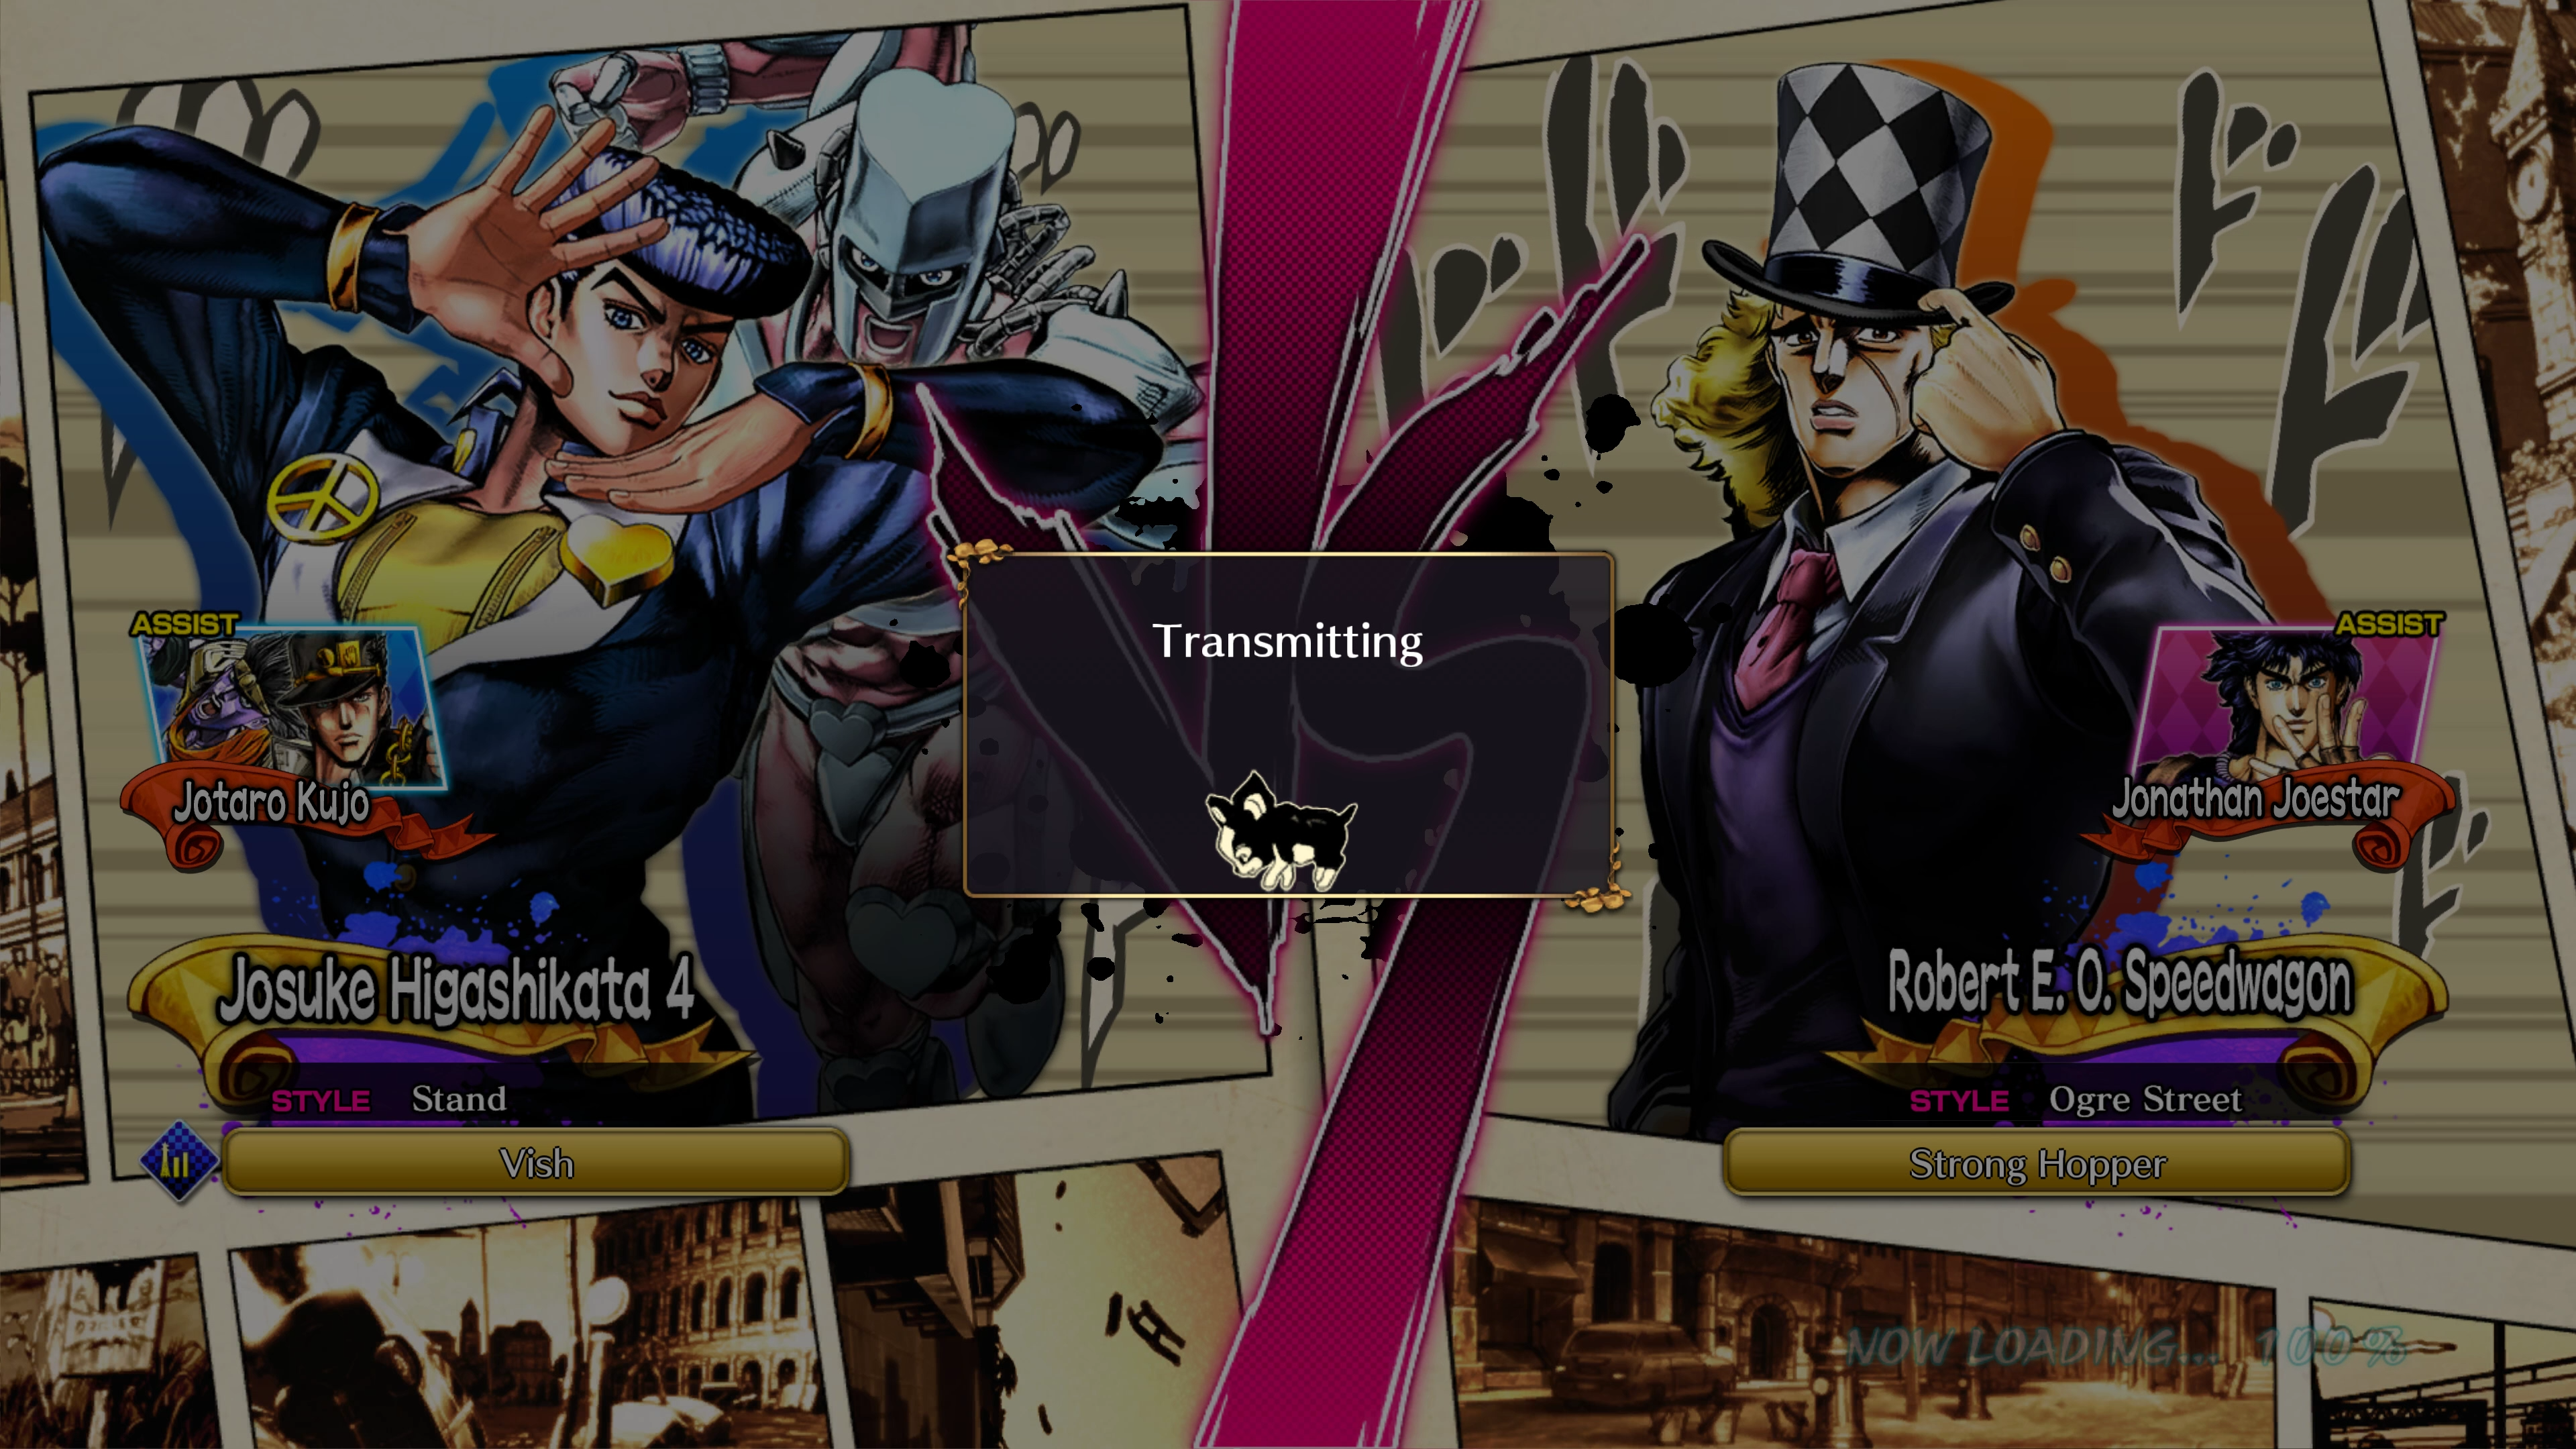 Create your dream matches with JOJO'S BIZARRE ADVENTURE: ALL-STAR BATTLE R,  available today!